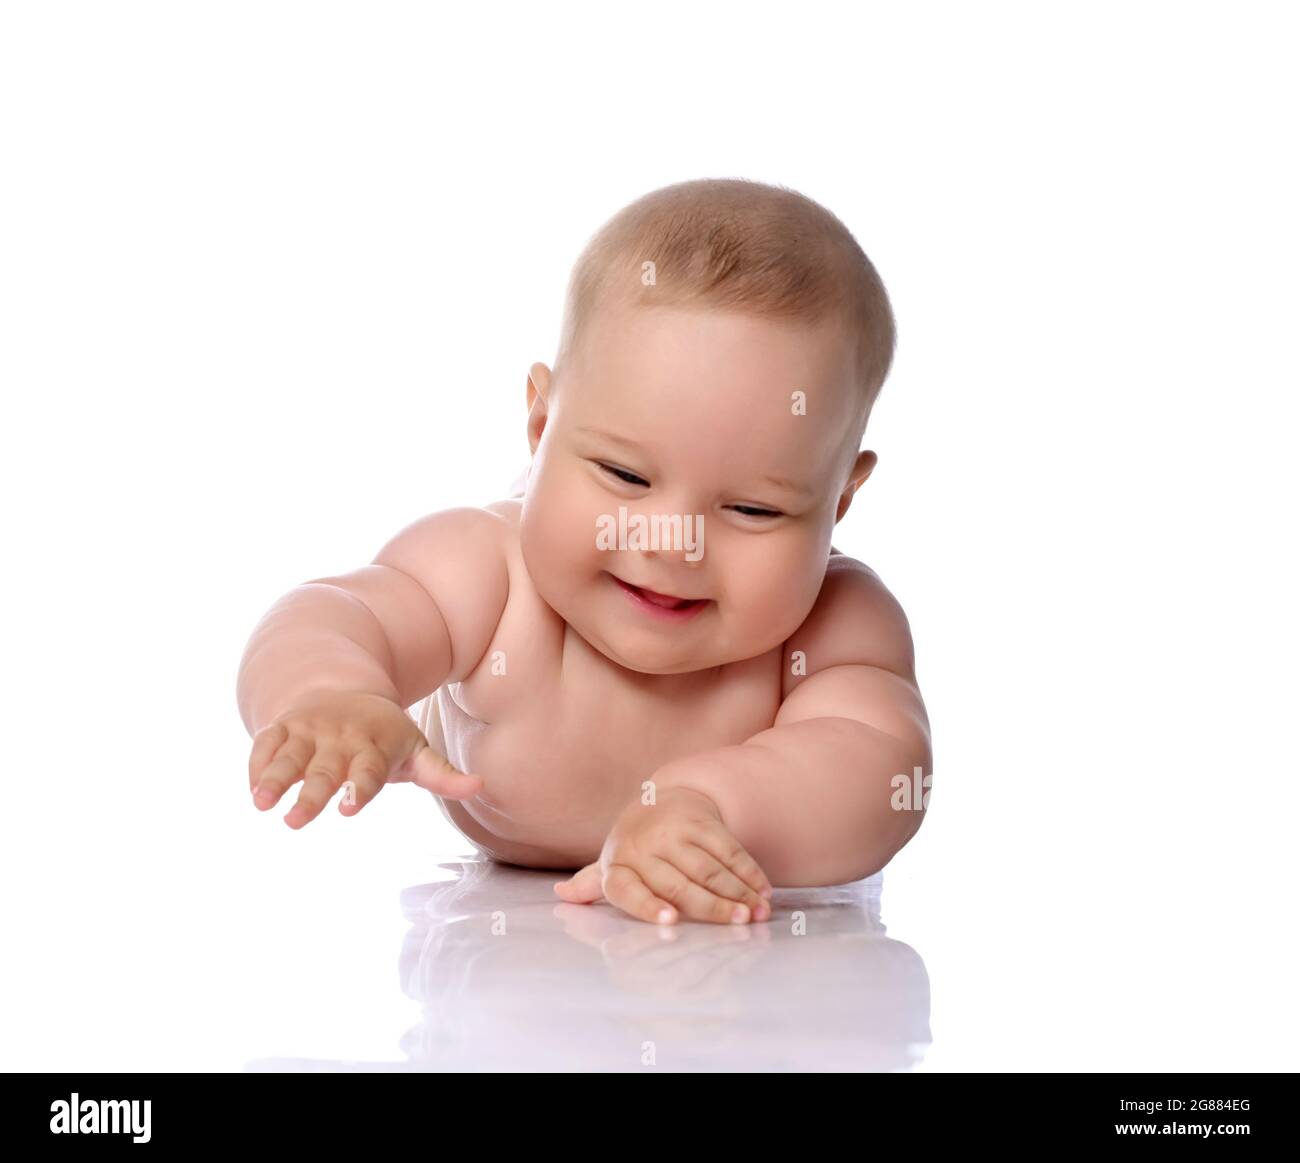 Smiling, laughing infant child baby girl kid in diaper is lying on her tummy holding hand up, slapping on floor  Stock Photo